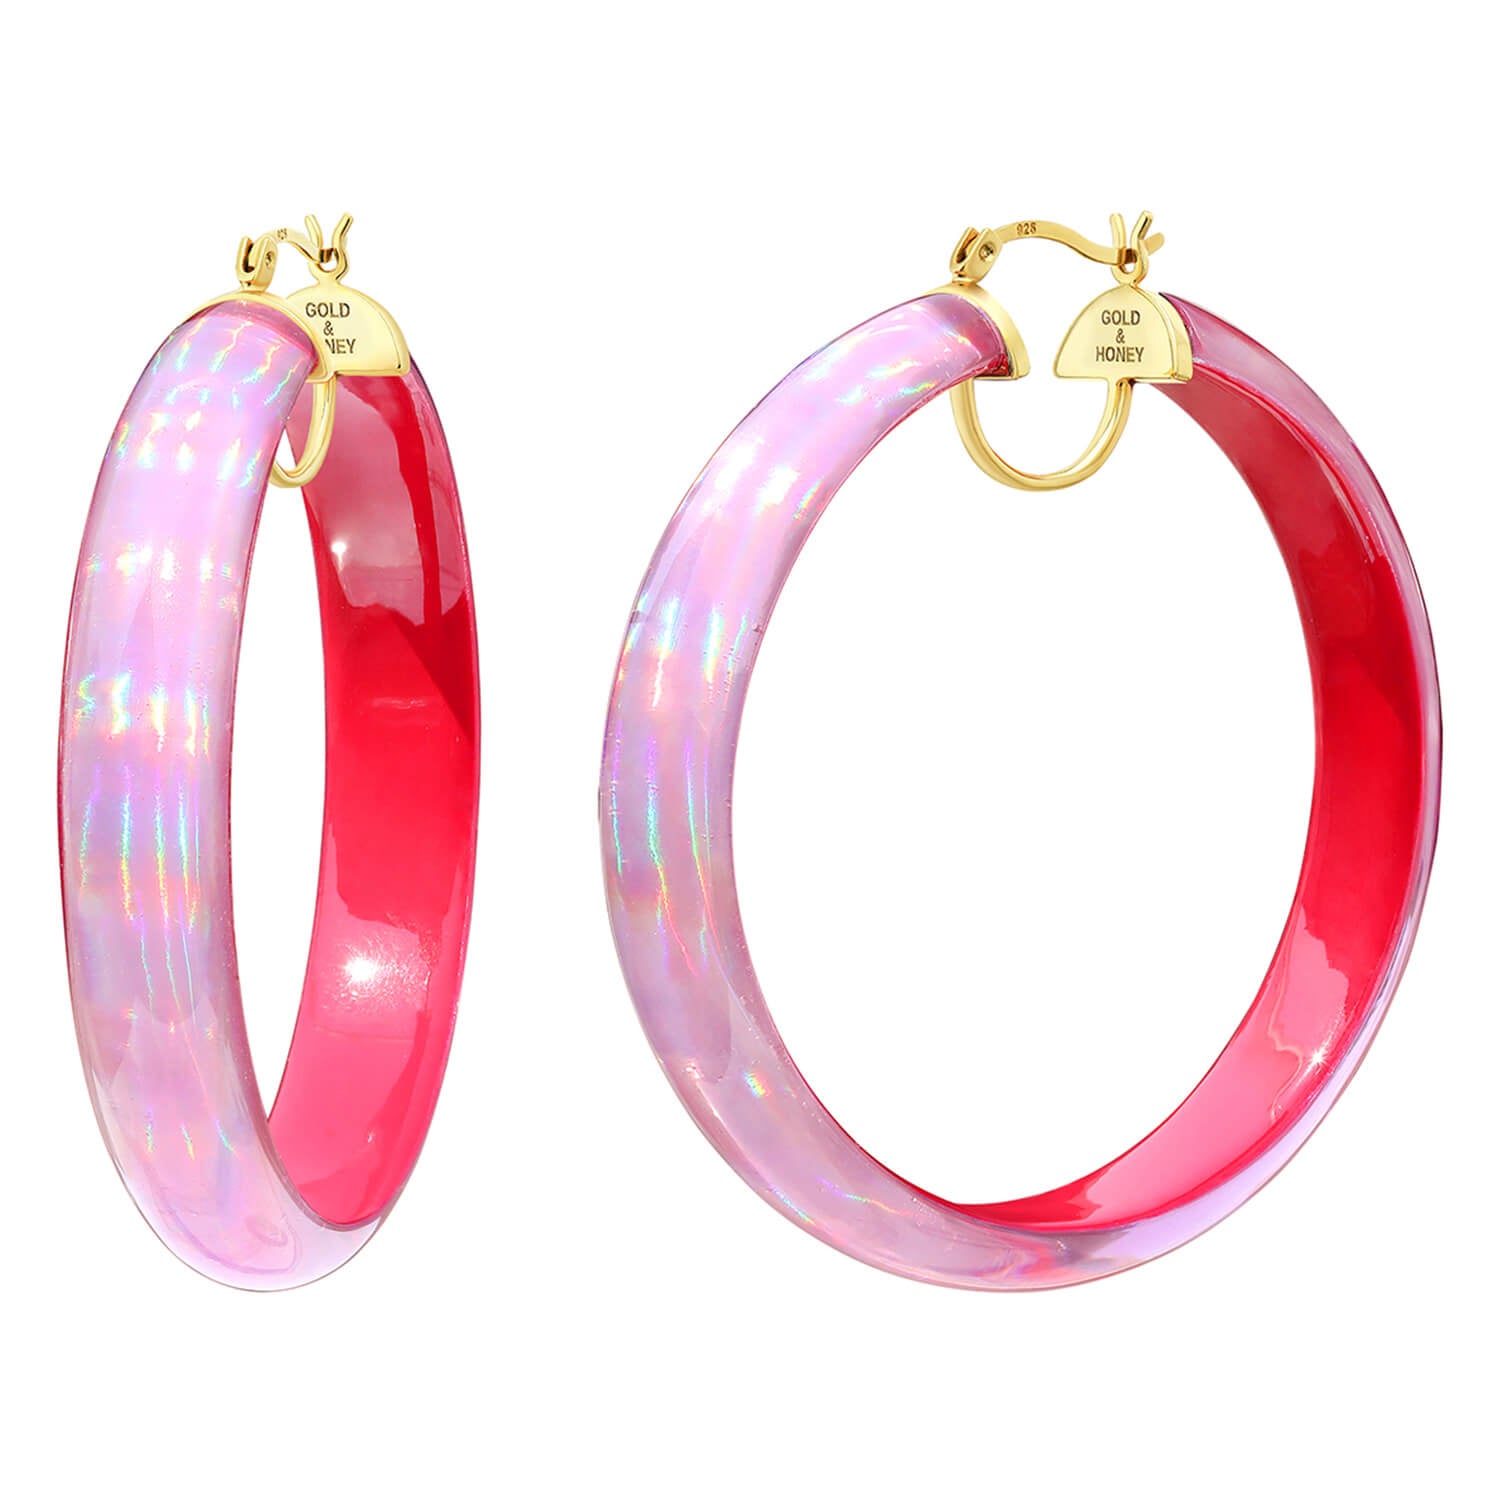 Rave Lucite Hoops in Pink